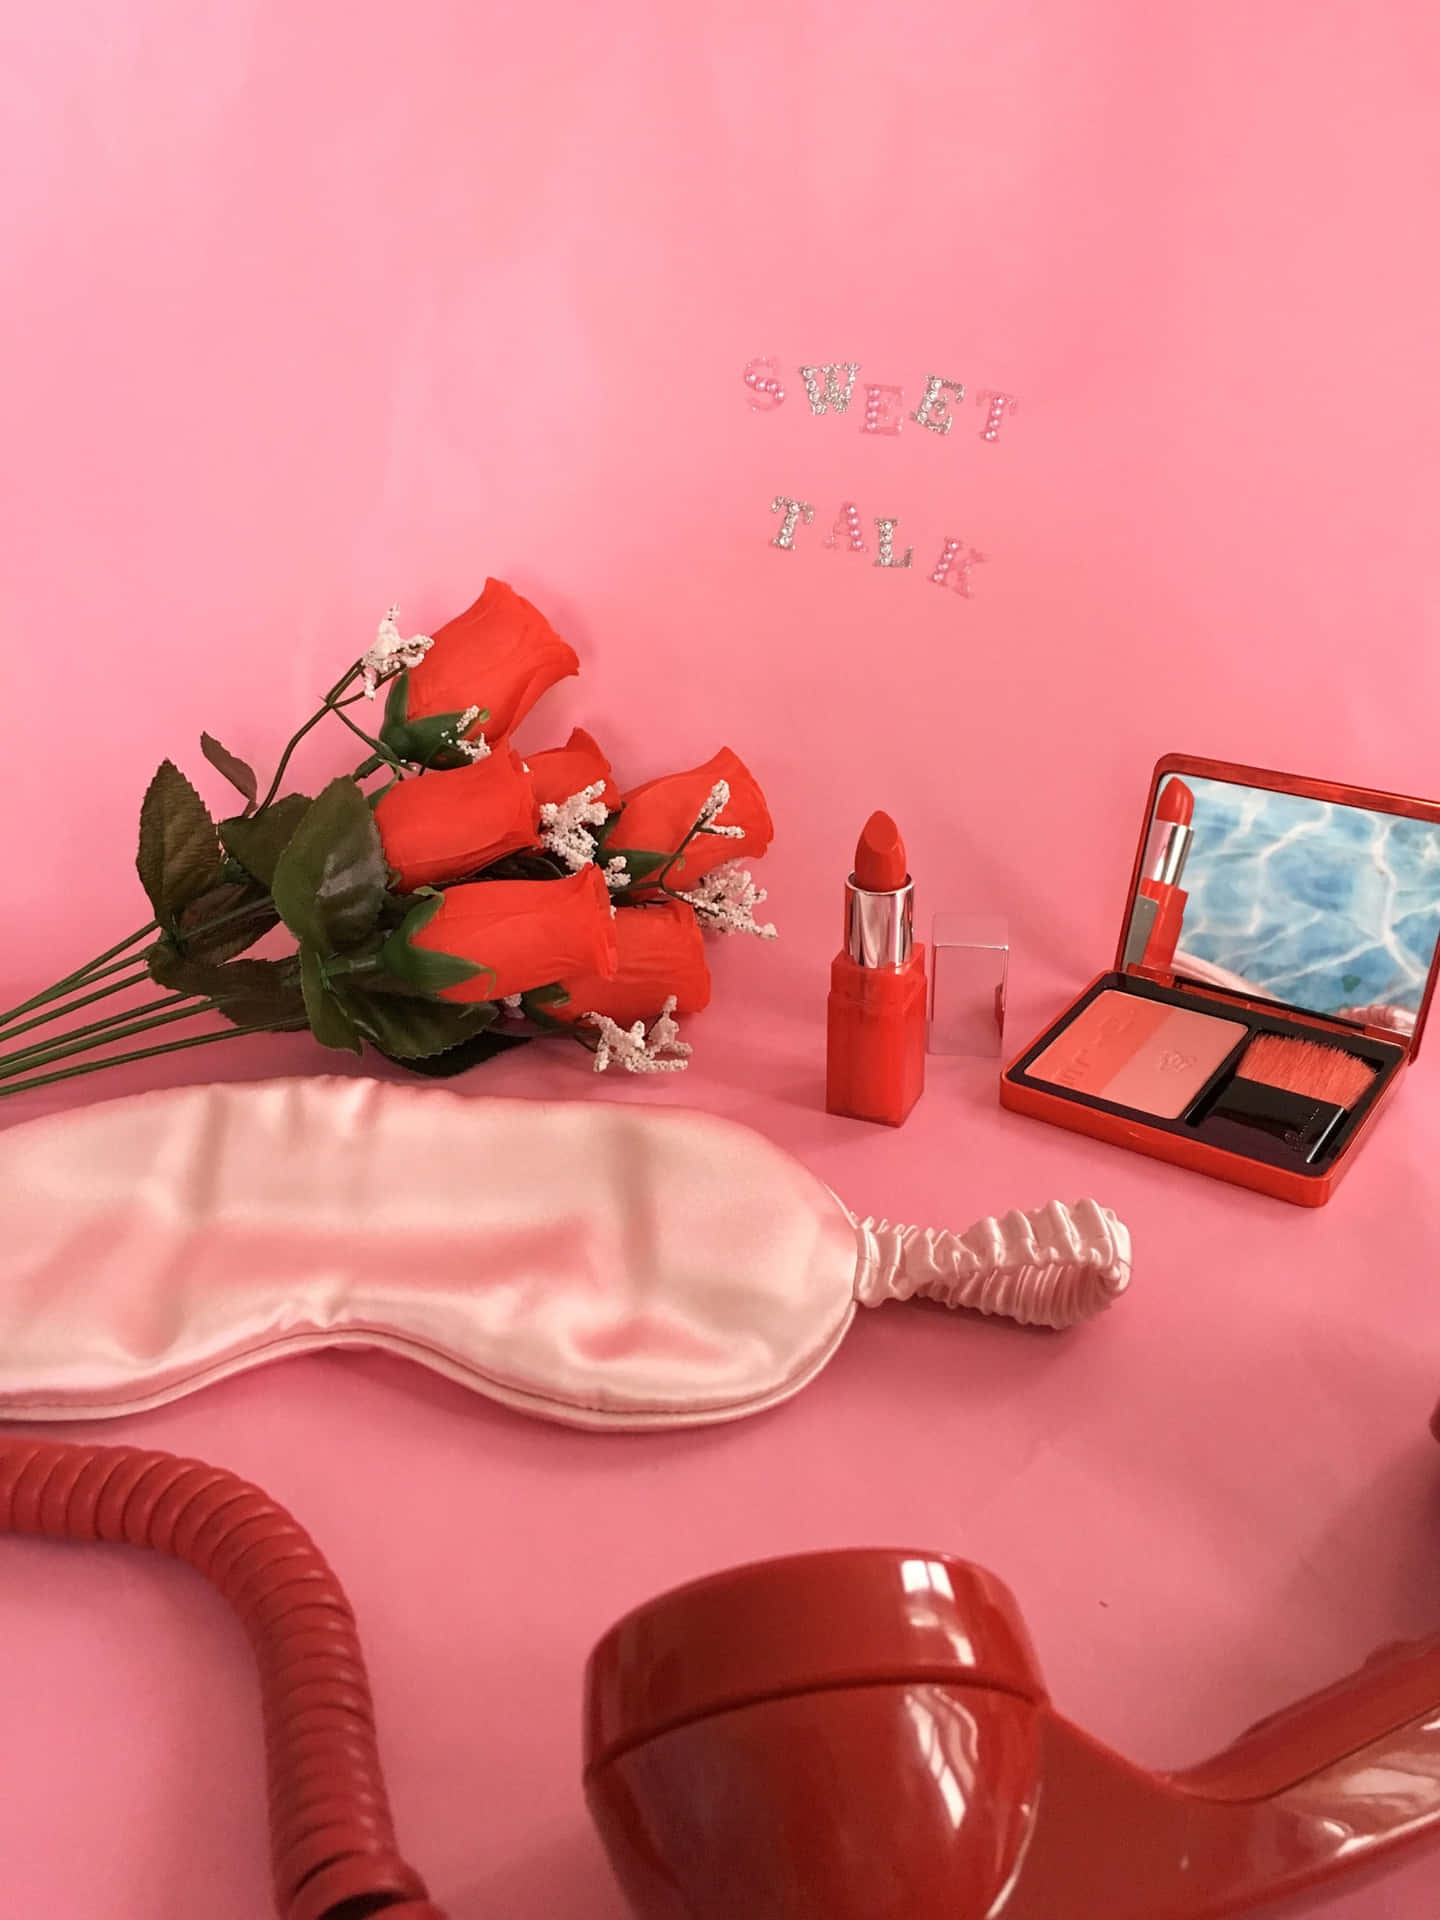 Red Rose, Makeup Conceptual Photography Aesthetic Valentine's Day Wallpaper